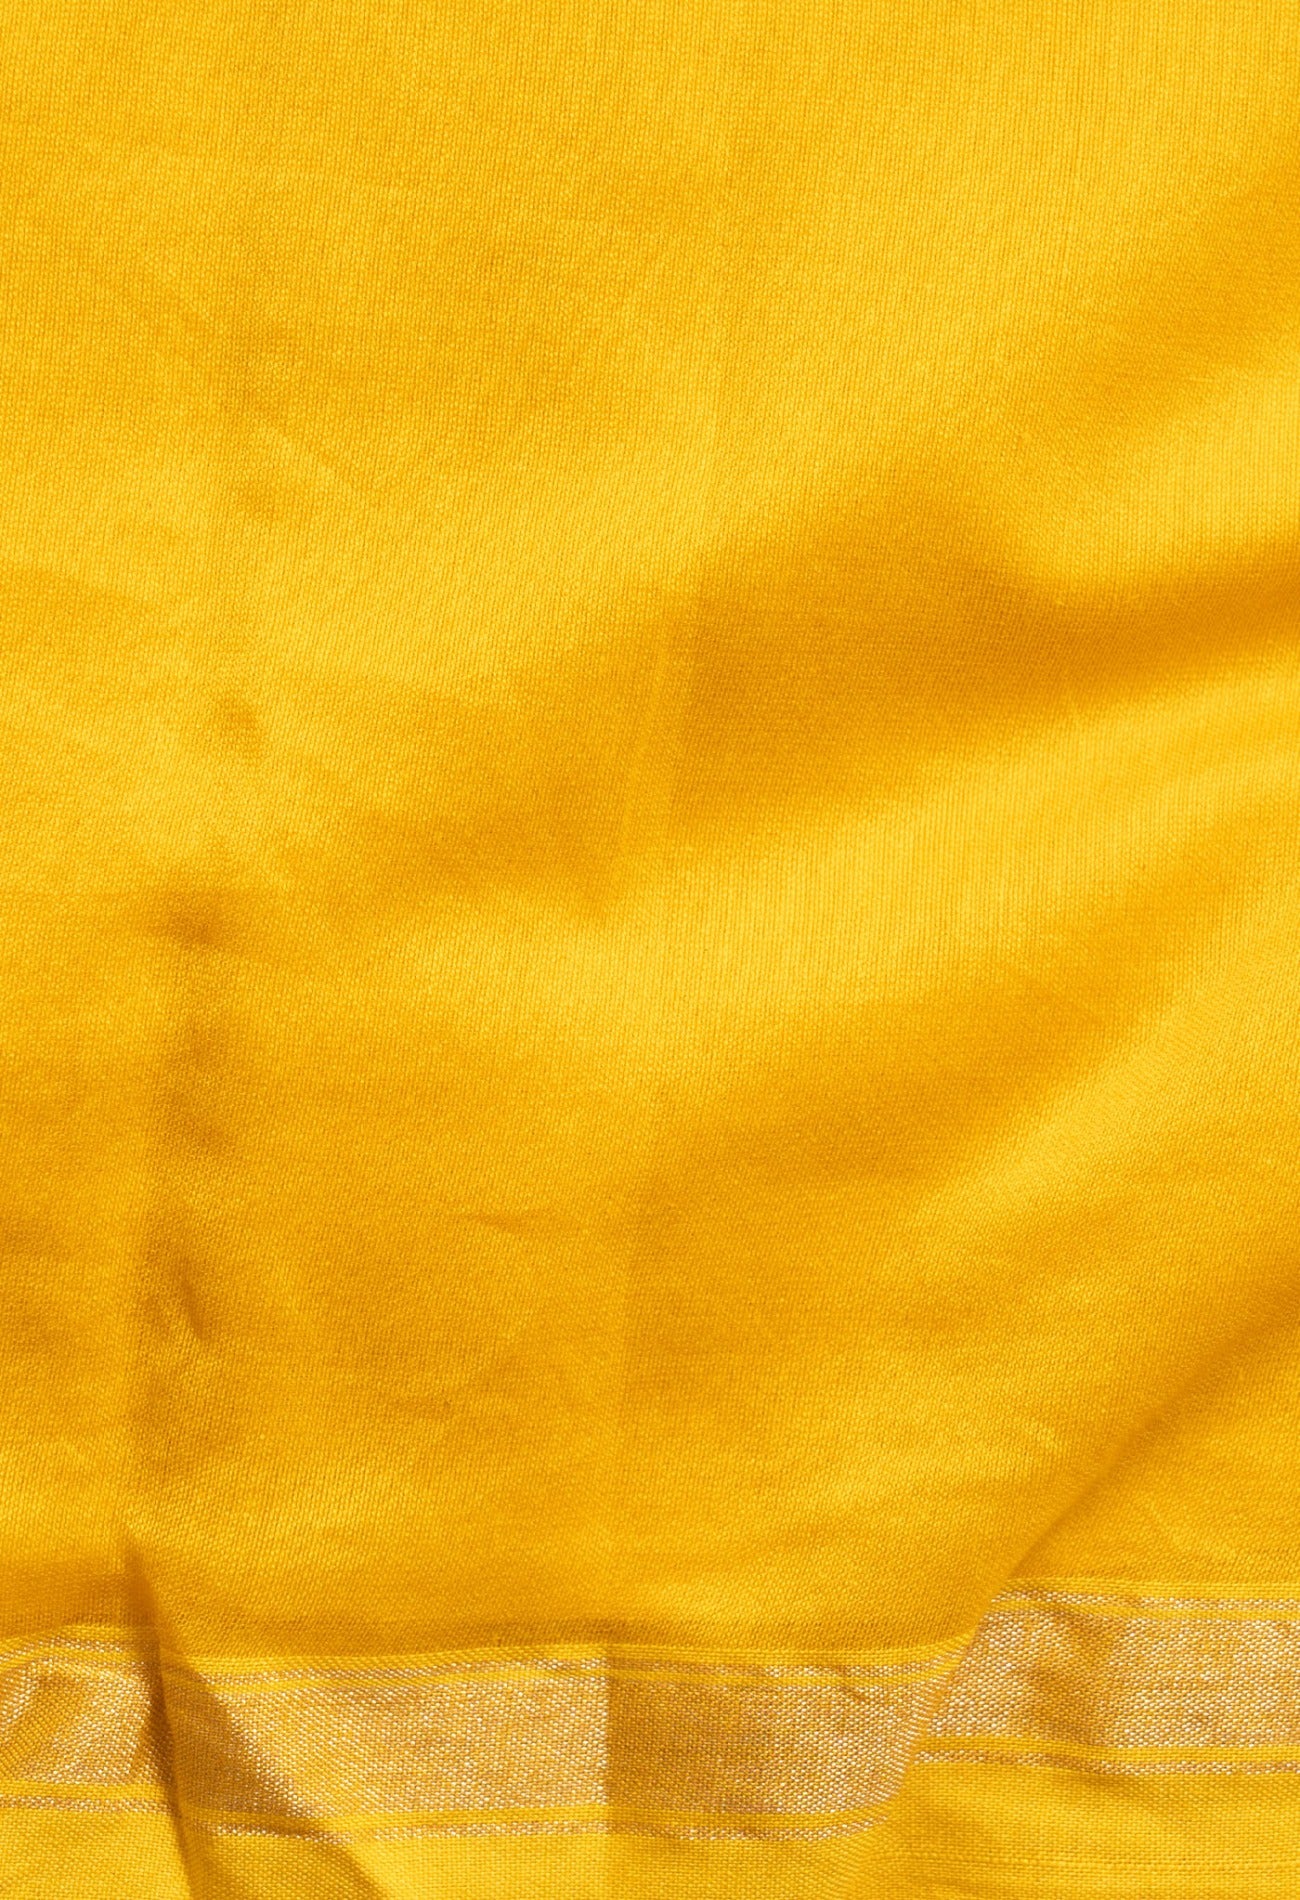 Online Shopping for Yellow Pure Chanderi Sico Saree with Weaving from Madhya Pradesh at Unnatisilks.com India
